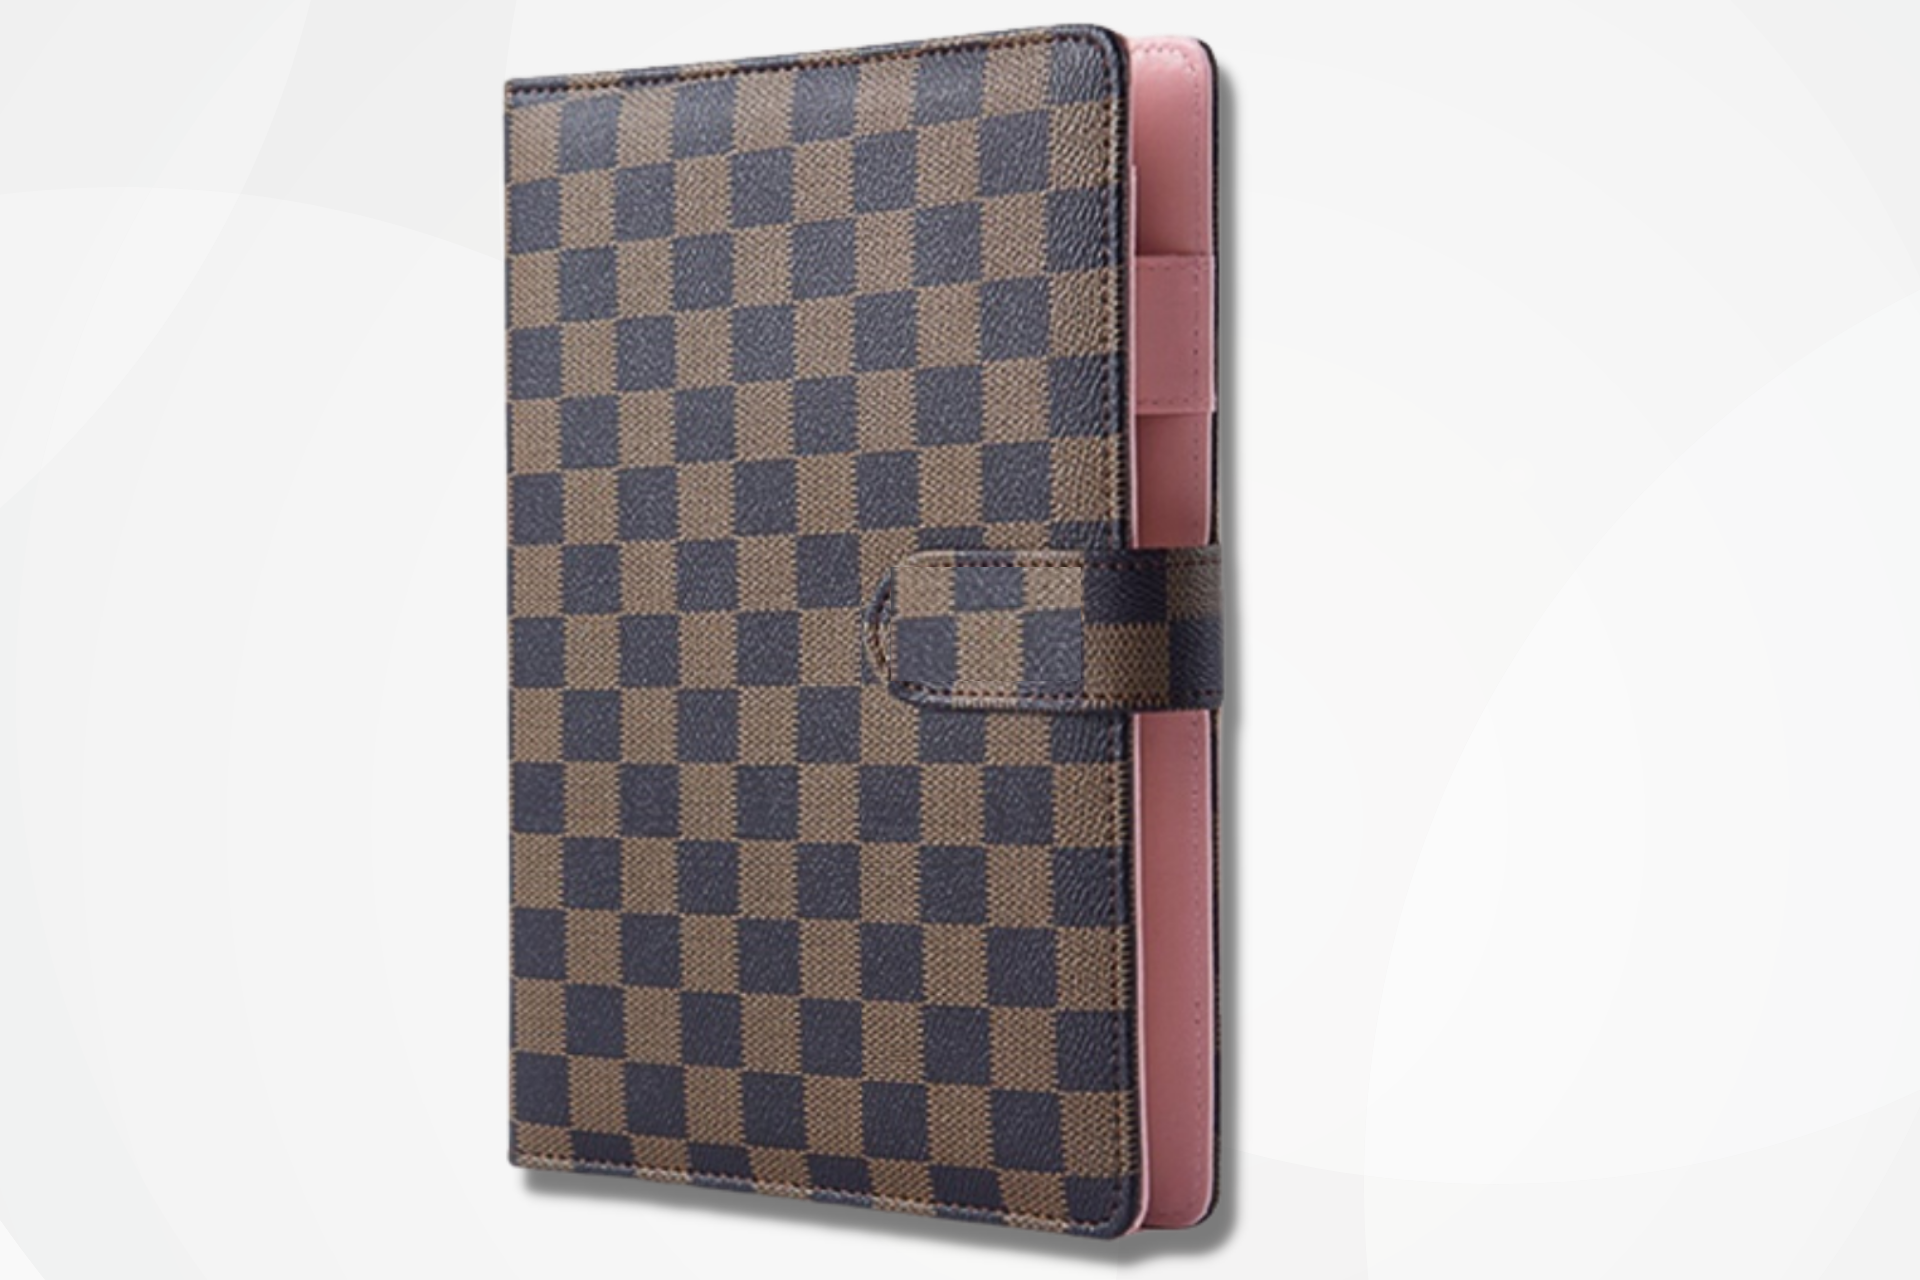 A6 White Checkered Budget Binder With Cash Envelpes